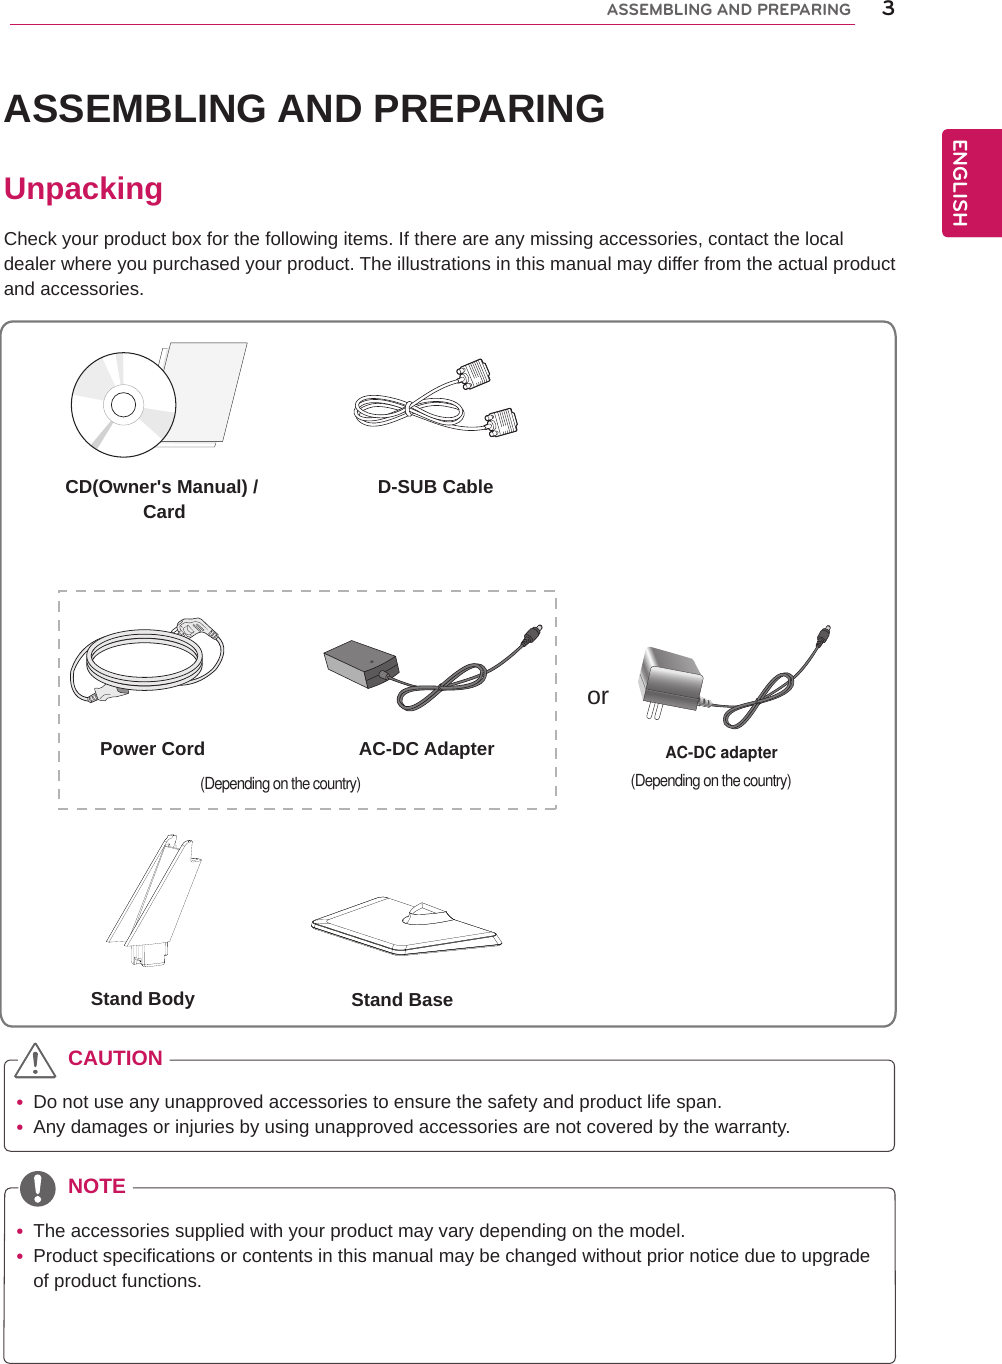 3ENGENGLISHASSEMBLING AND PREPARINGASSEMBLING AND PREPARINGUnpackingCheck your product box for the following items. If there are any missing accessories, contact the local dealer where you purchased your product. The illustrations in this manual may differ from the actual product and accessories. yDo not use any unapproved accessories to ensure the safety and product life span. yAny damages or injuries by using unapproved accessories are not covered by the warranty.  yThe accessories supplied with your product may vary depending on the model. yProduct specifications or contents in this manual may be changed without prior notice due to upgrade of product functions.CAUTIONNOTECD(Owner&apos;s Manual) / Card D-SUB CableorPower Cord AC-DC AdapterAC-DC adapter(Depending on the country)Stand Body Stand Base(Depending on the country)